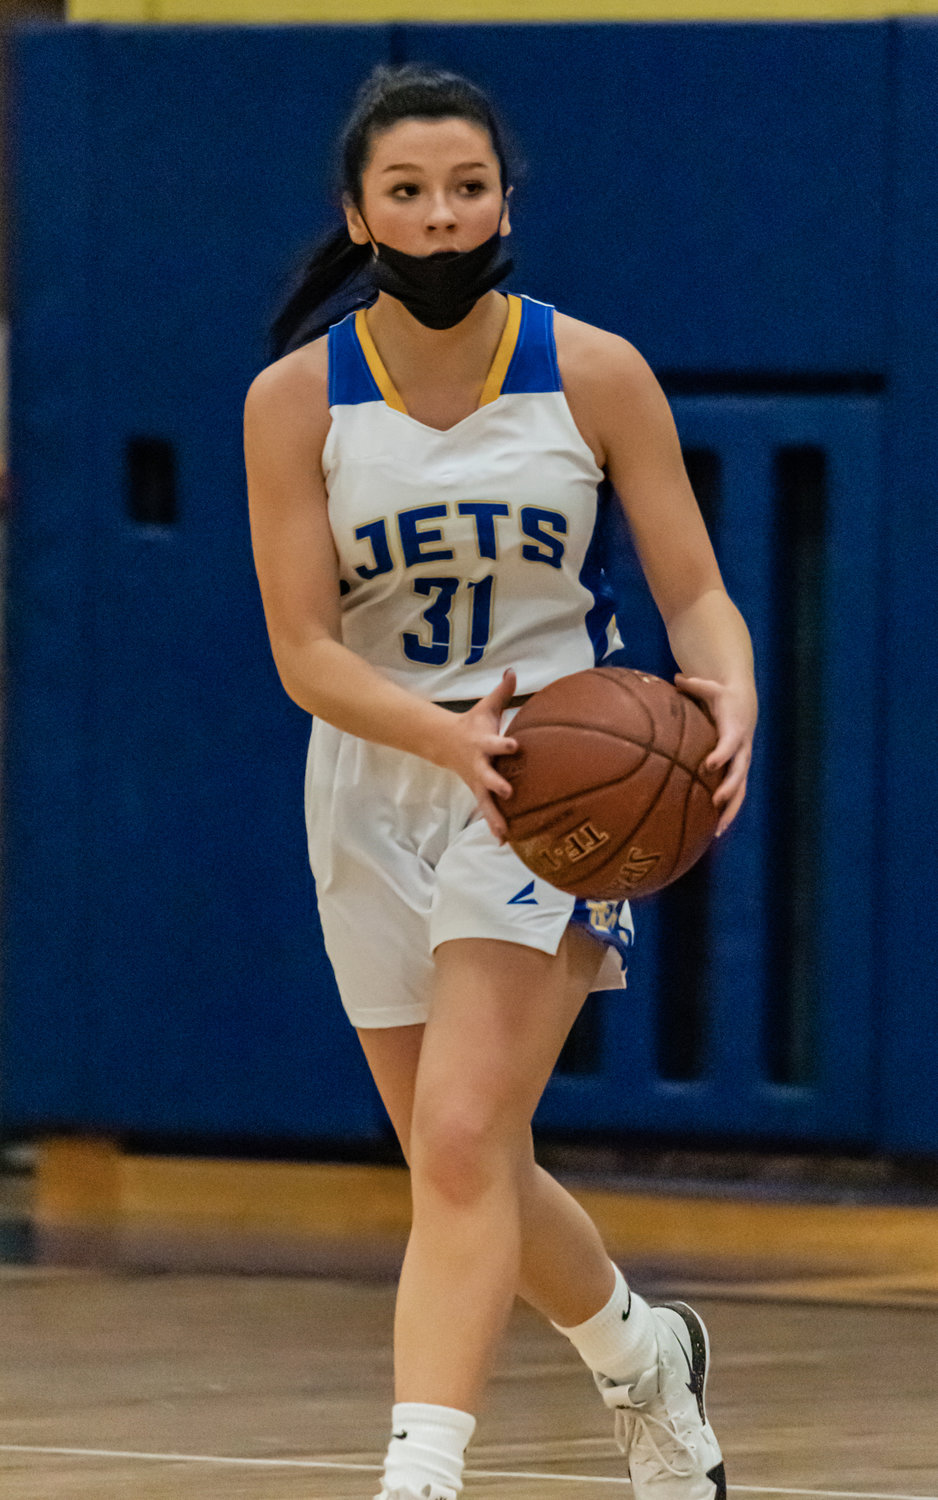 Senior Lindsay Solenski poured in 20 points on Dec. 21 to help East Meadow defeat Westbury, 64-48, in a Conference AA-II game.